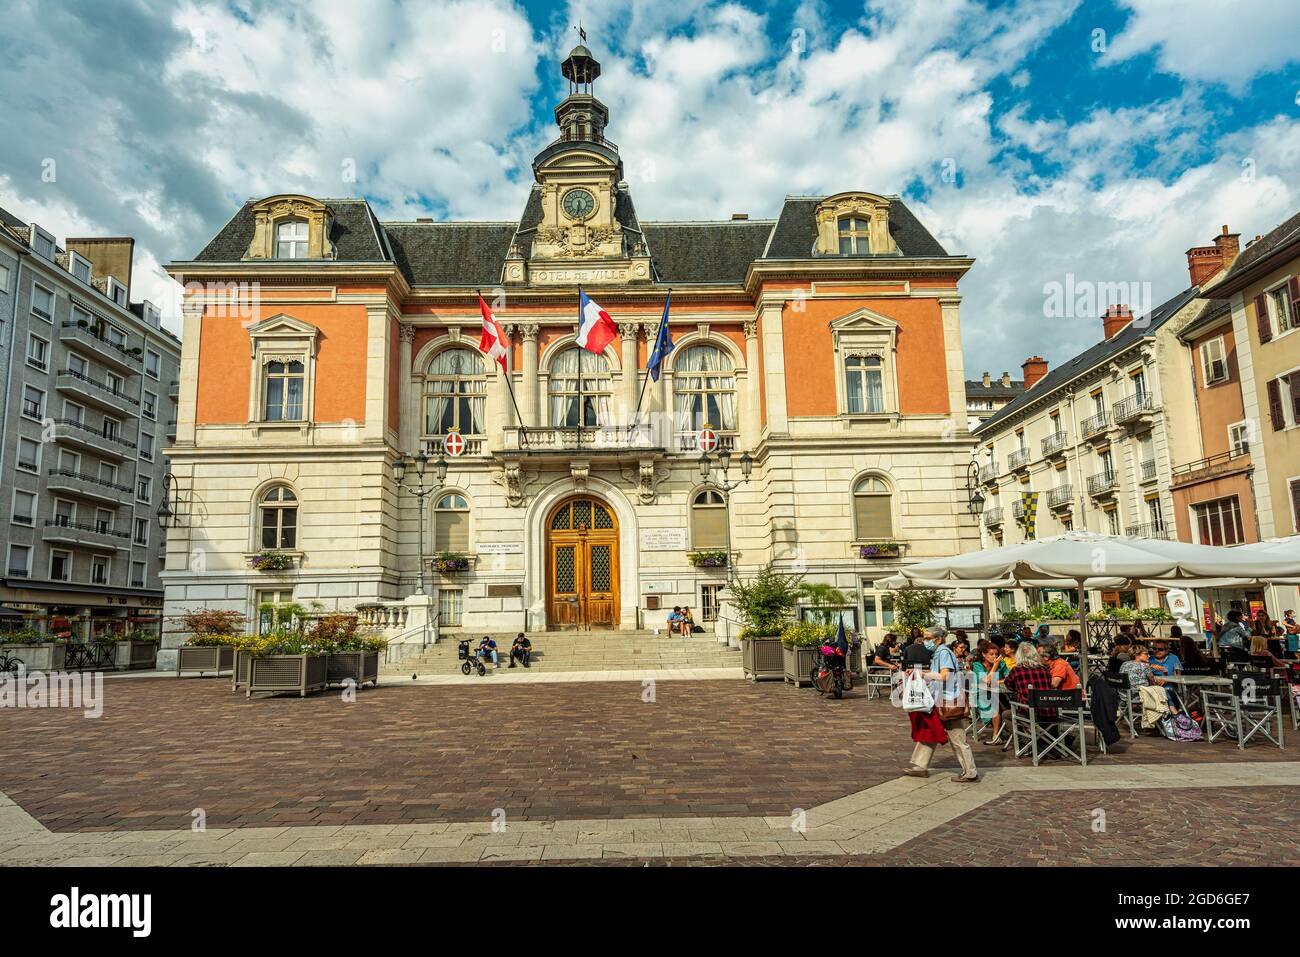 The building that houses the Town Hall of the city of Chambery, designed by the architect Charles-Bernard Pellegrini in 1863. Chambery, France Stock Photo